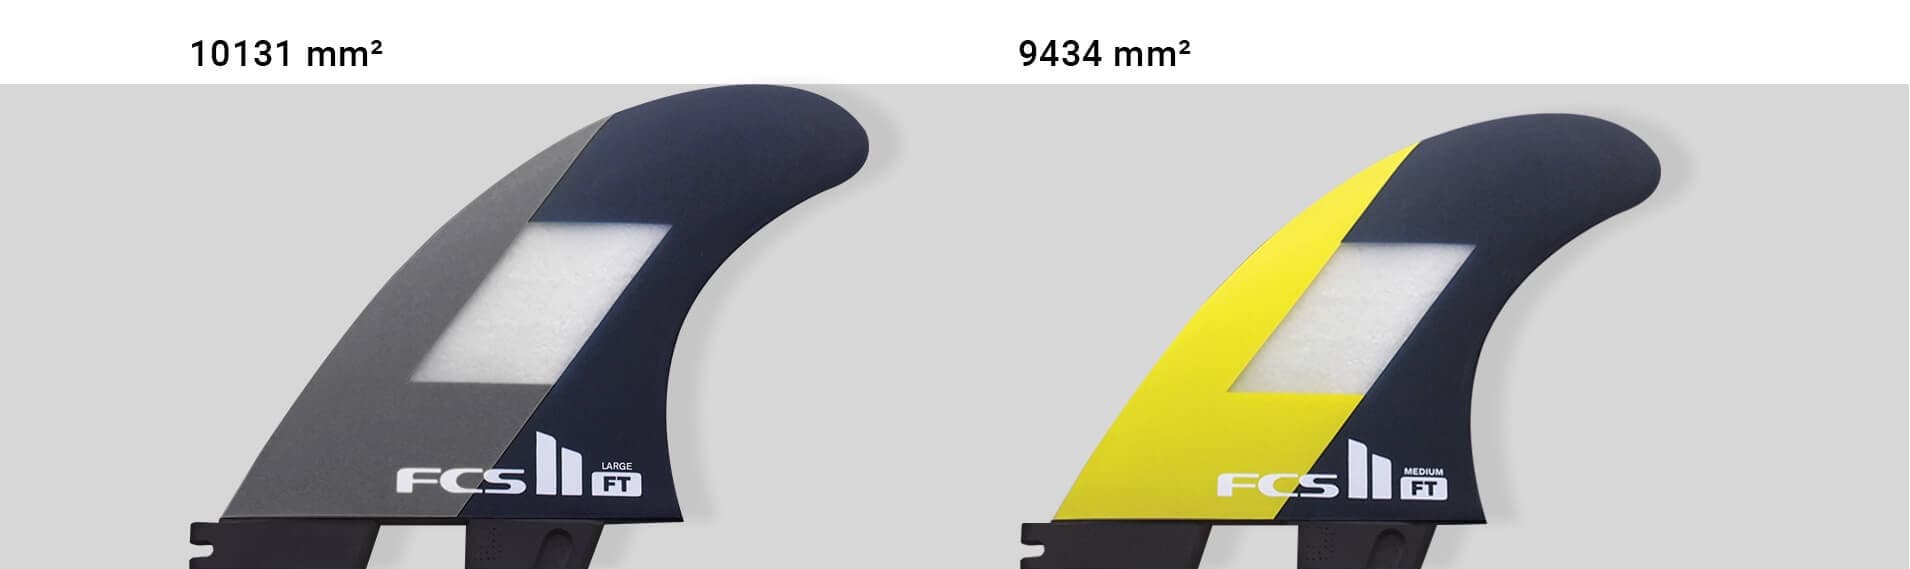 Surfboard Fin Size explained with FCS II